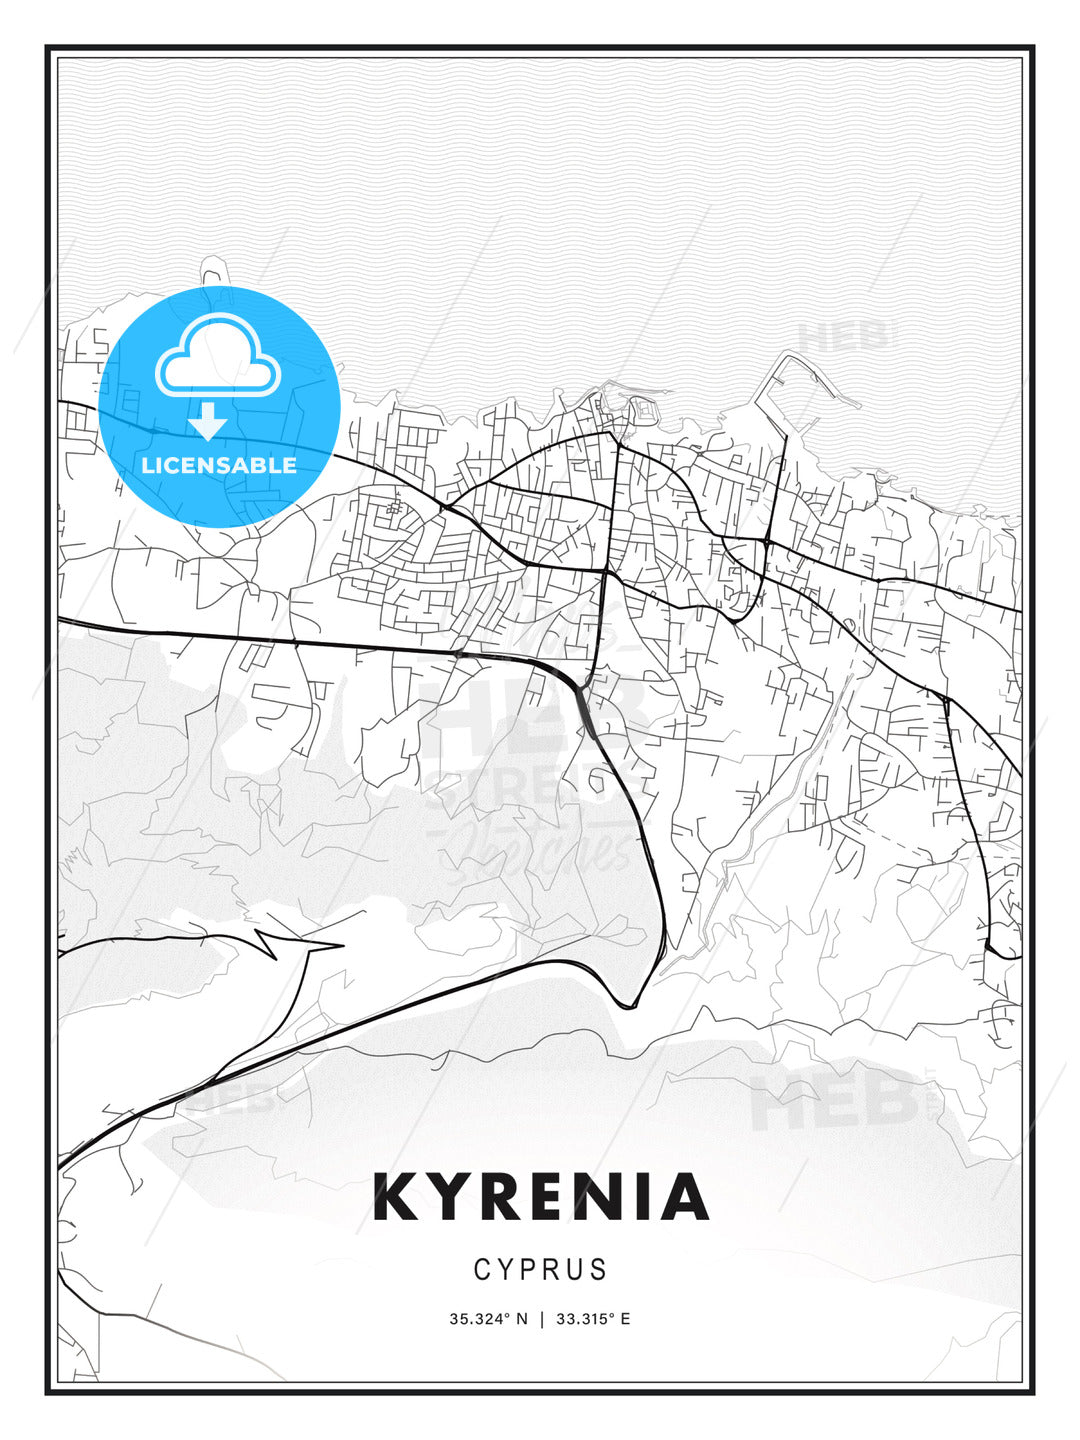 Kyrenia  , Cyprus, Modern Print Template in Various Formats - HEBSTREITS Sketches